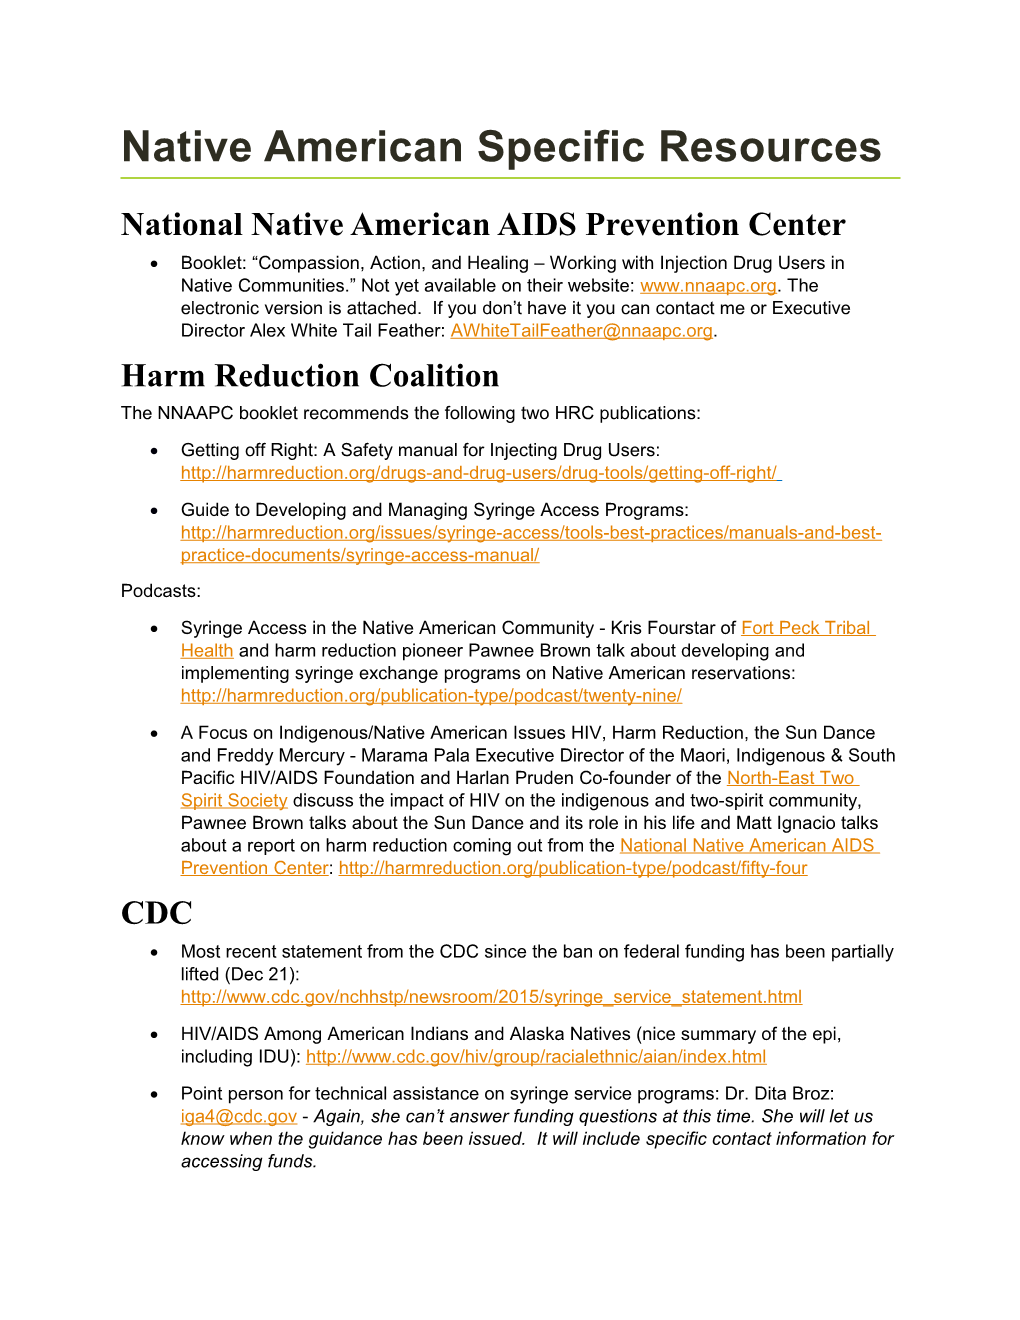 National Native American AIDS Prevention Center